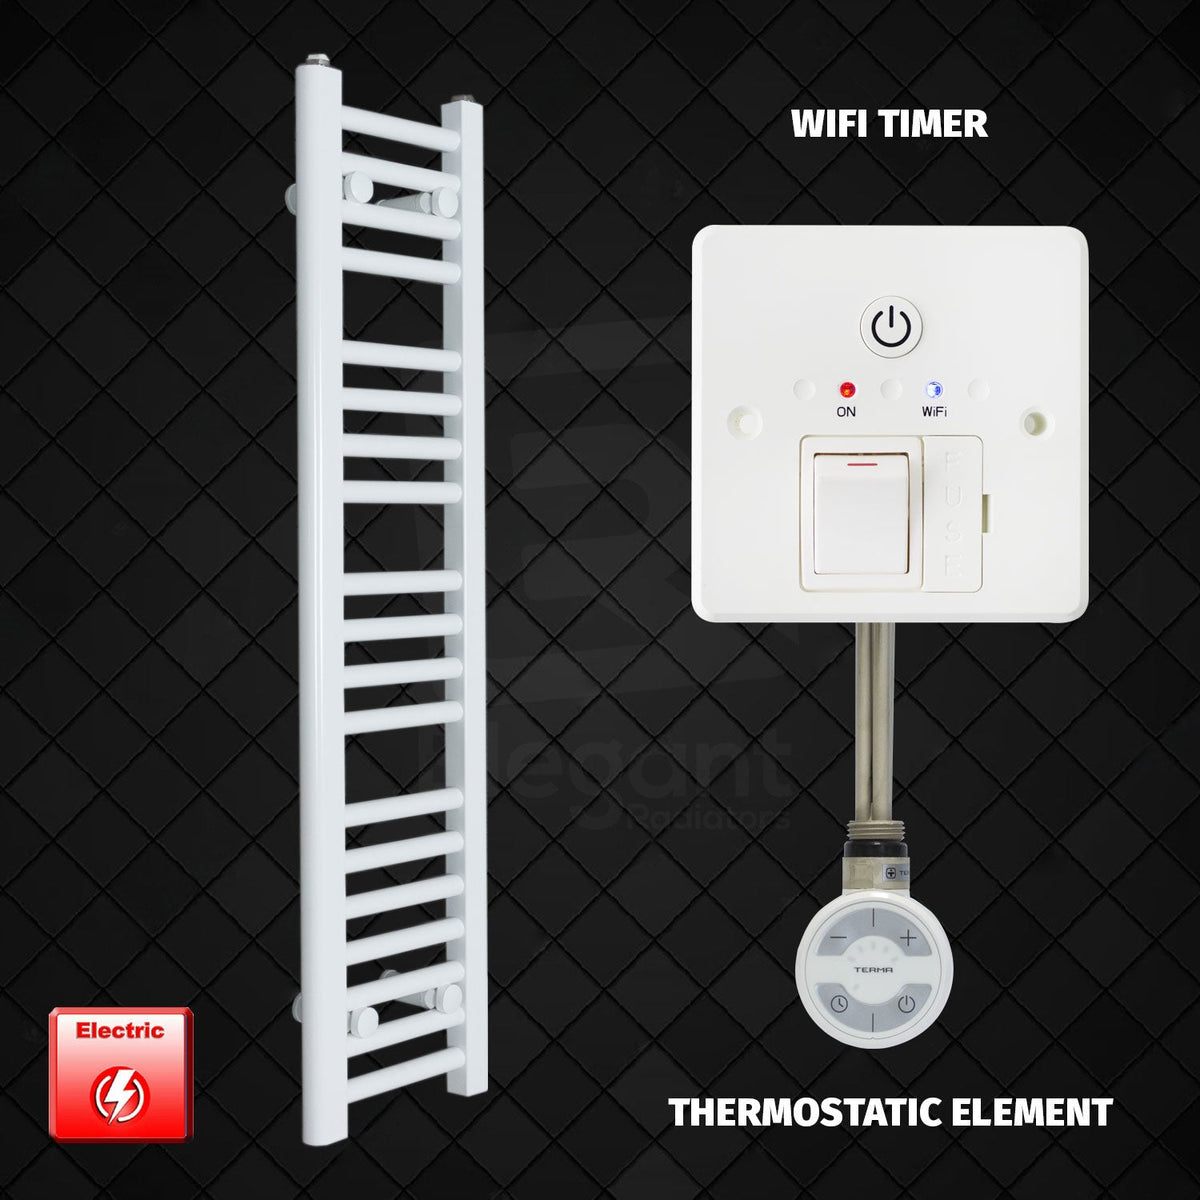 1000 mm High 200 mm Wide Pre-Filled Electric Towel Rail White HTR MOA Thermostatic Element Wifi Timer